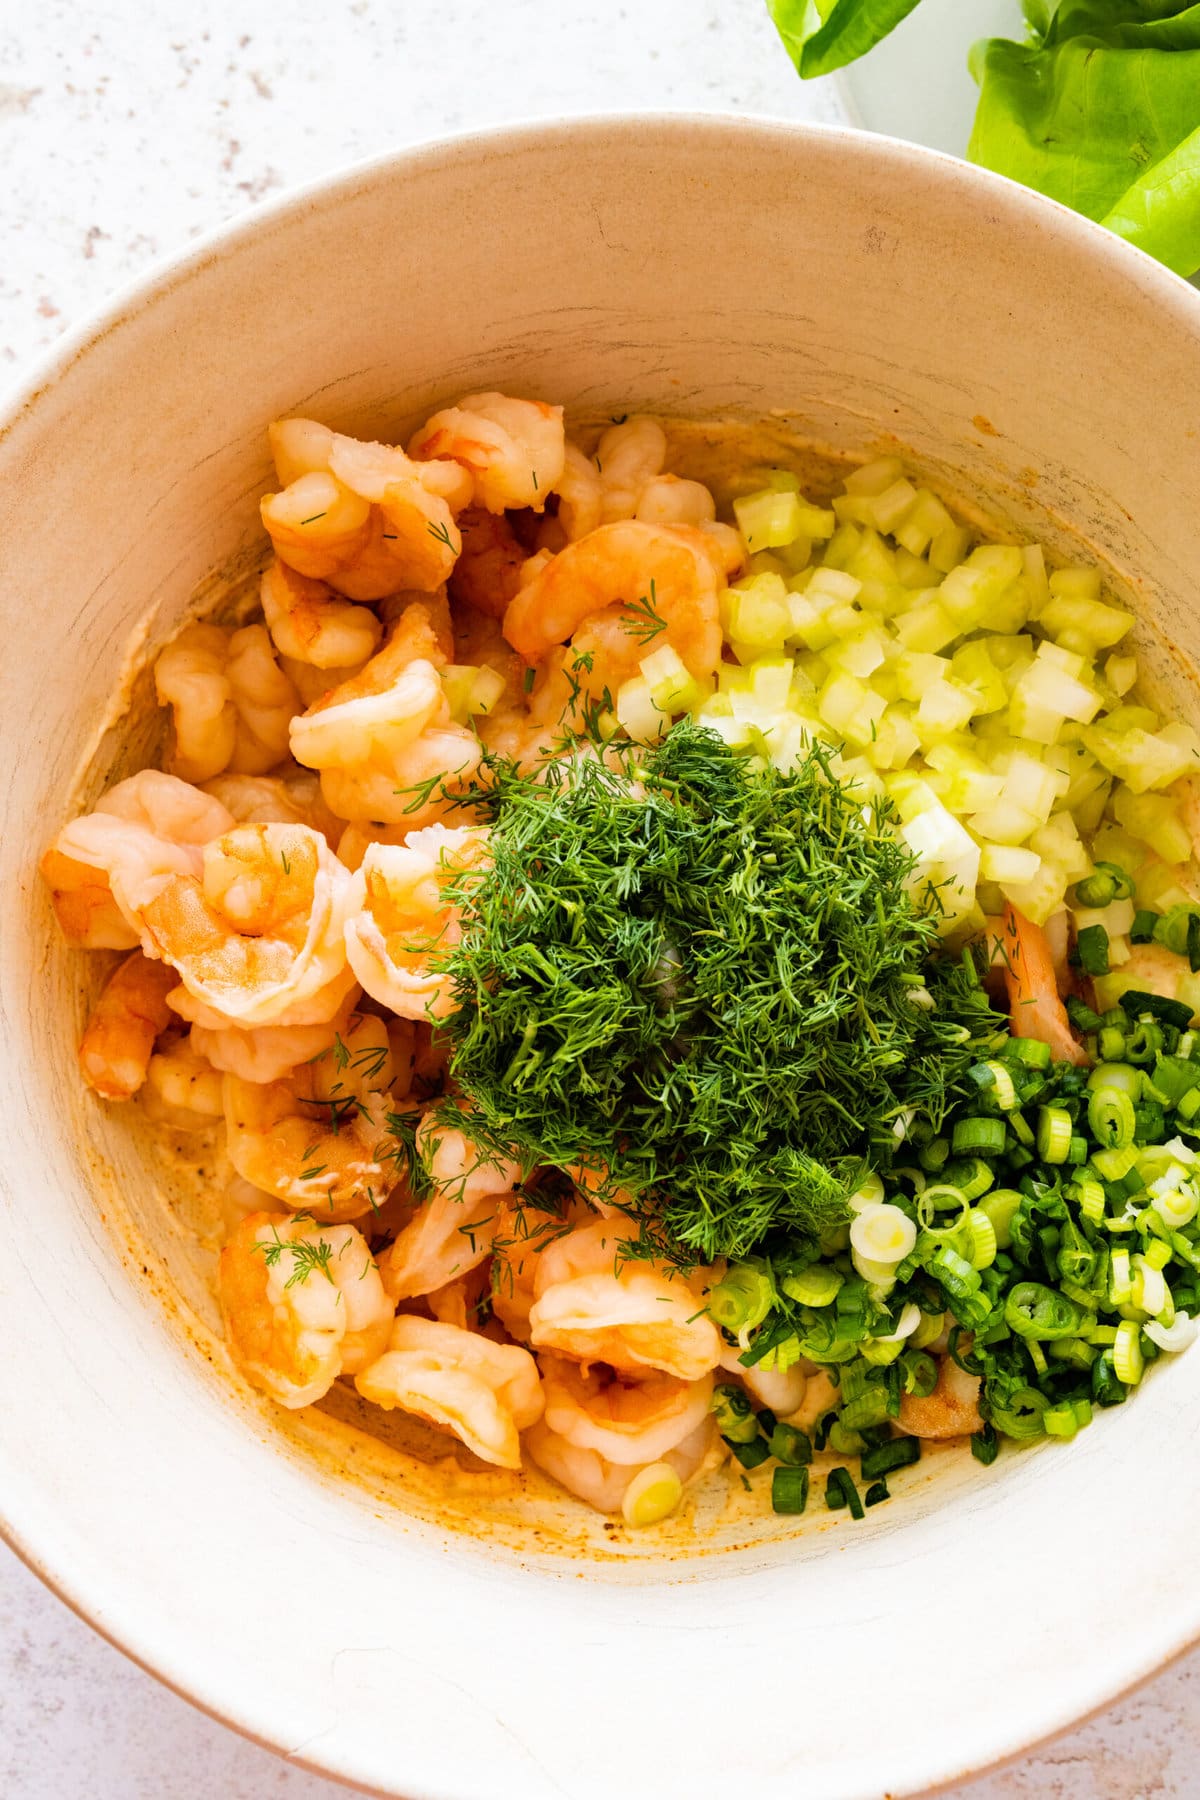 how to make shrimp salad step-by-step: adding all the ingredients in a bowl (herbs, shrimp, dressing, and celery).